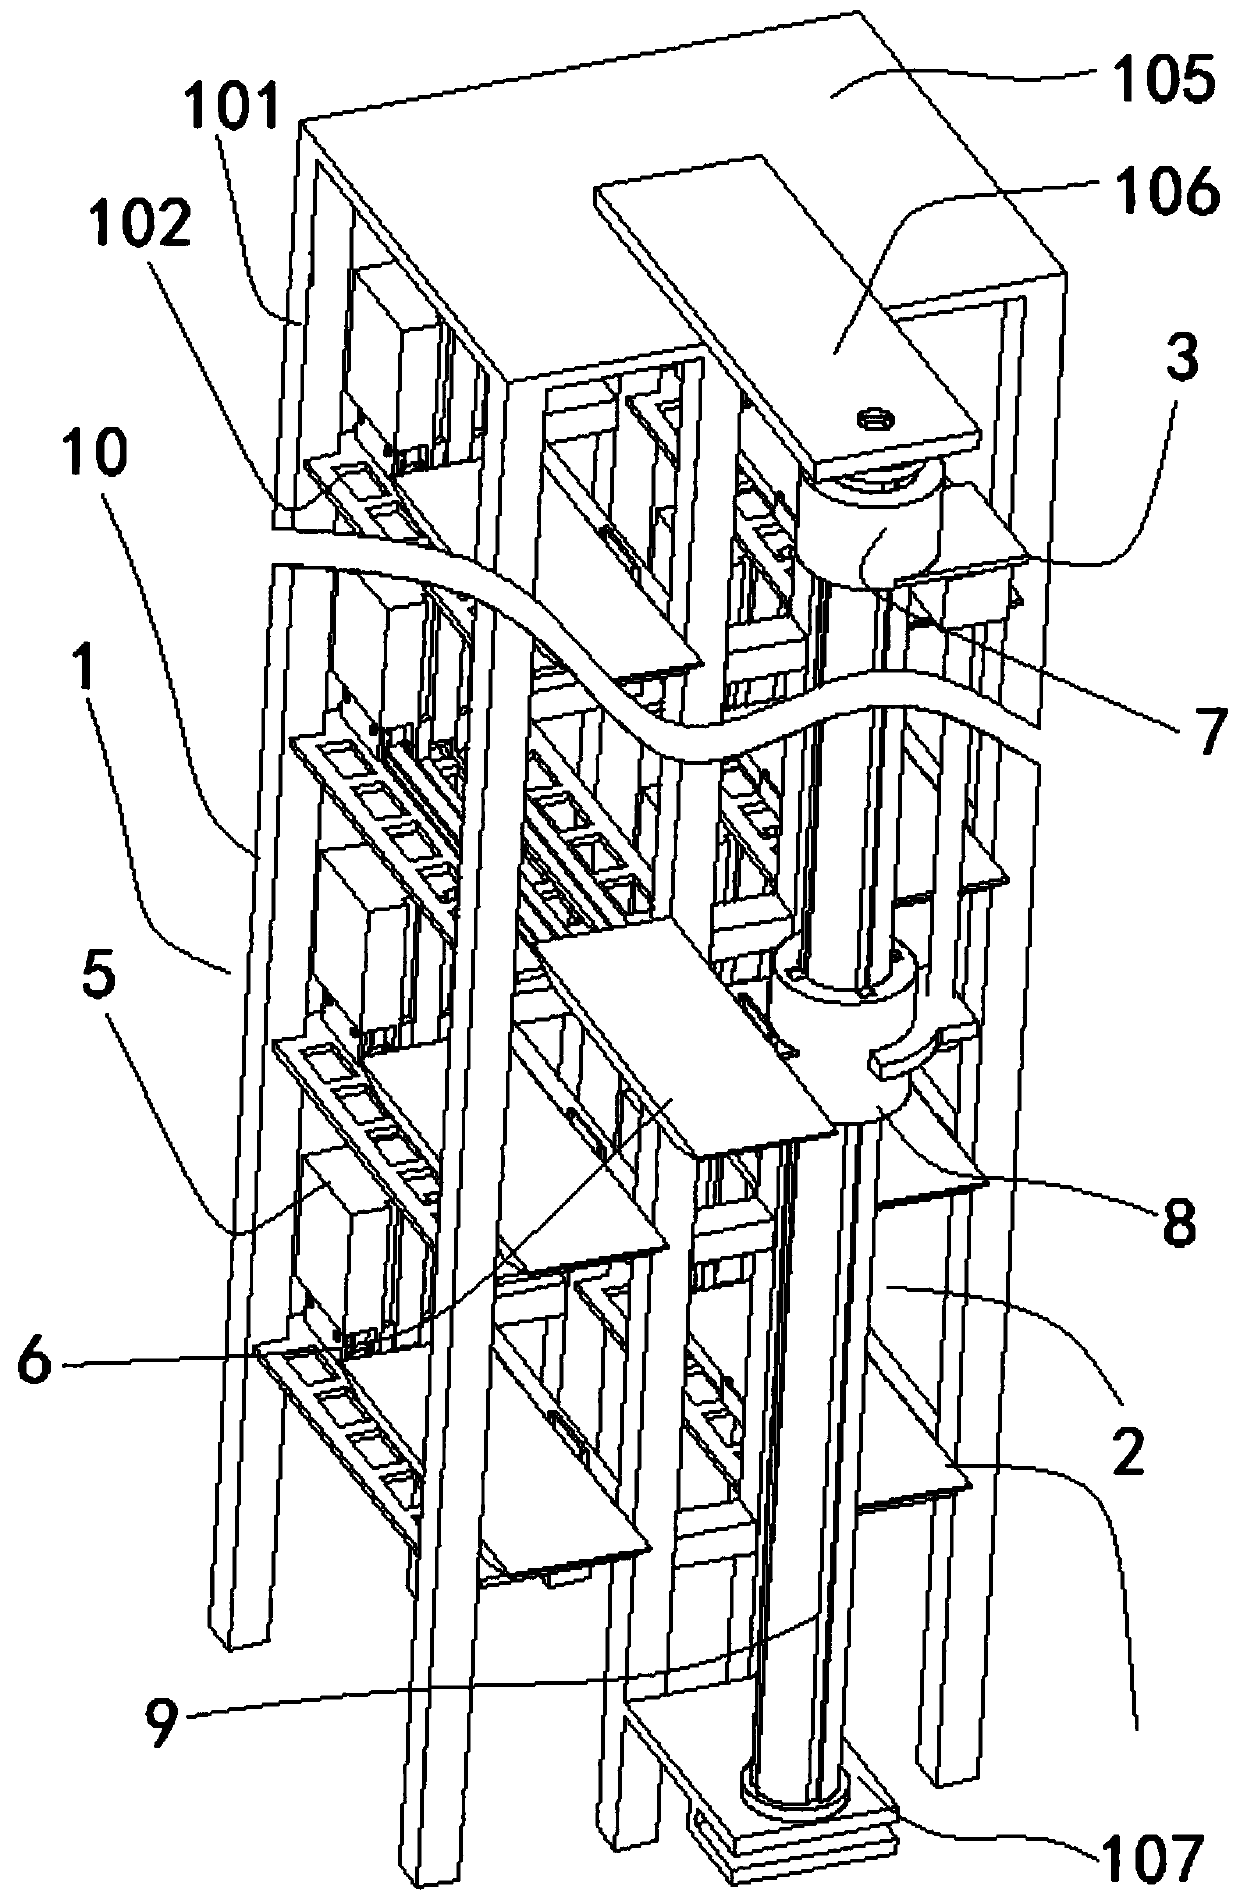 A semi-rotary high-rise parking tower